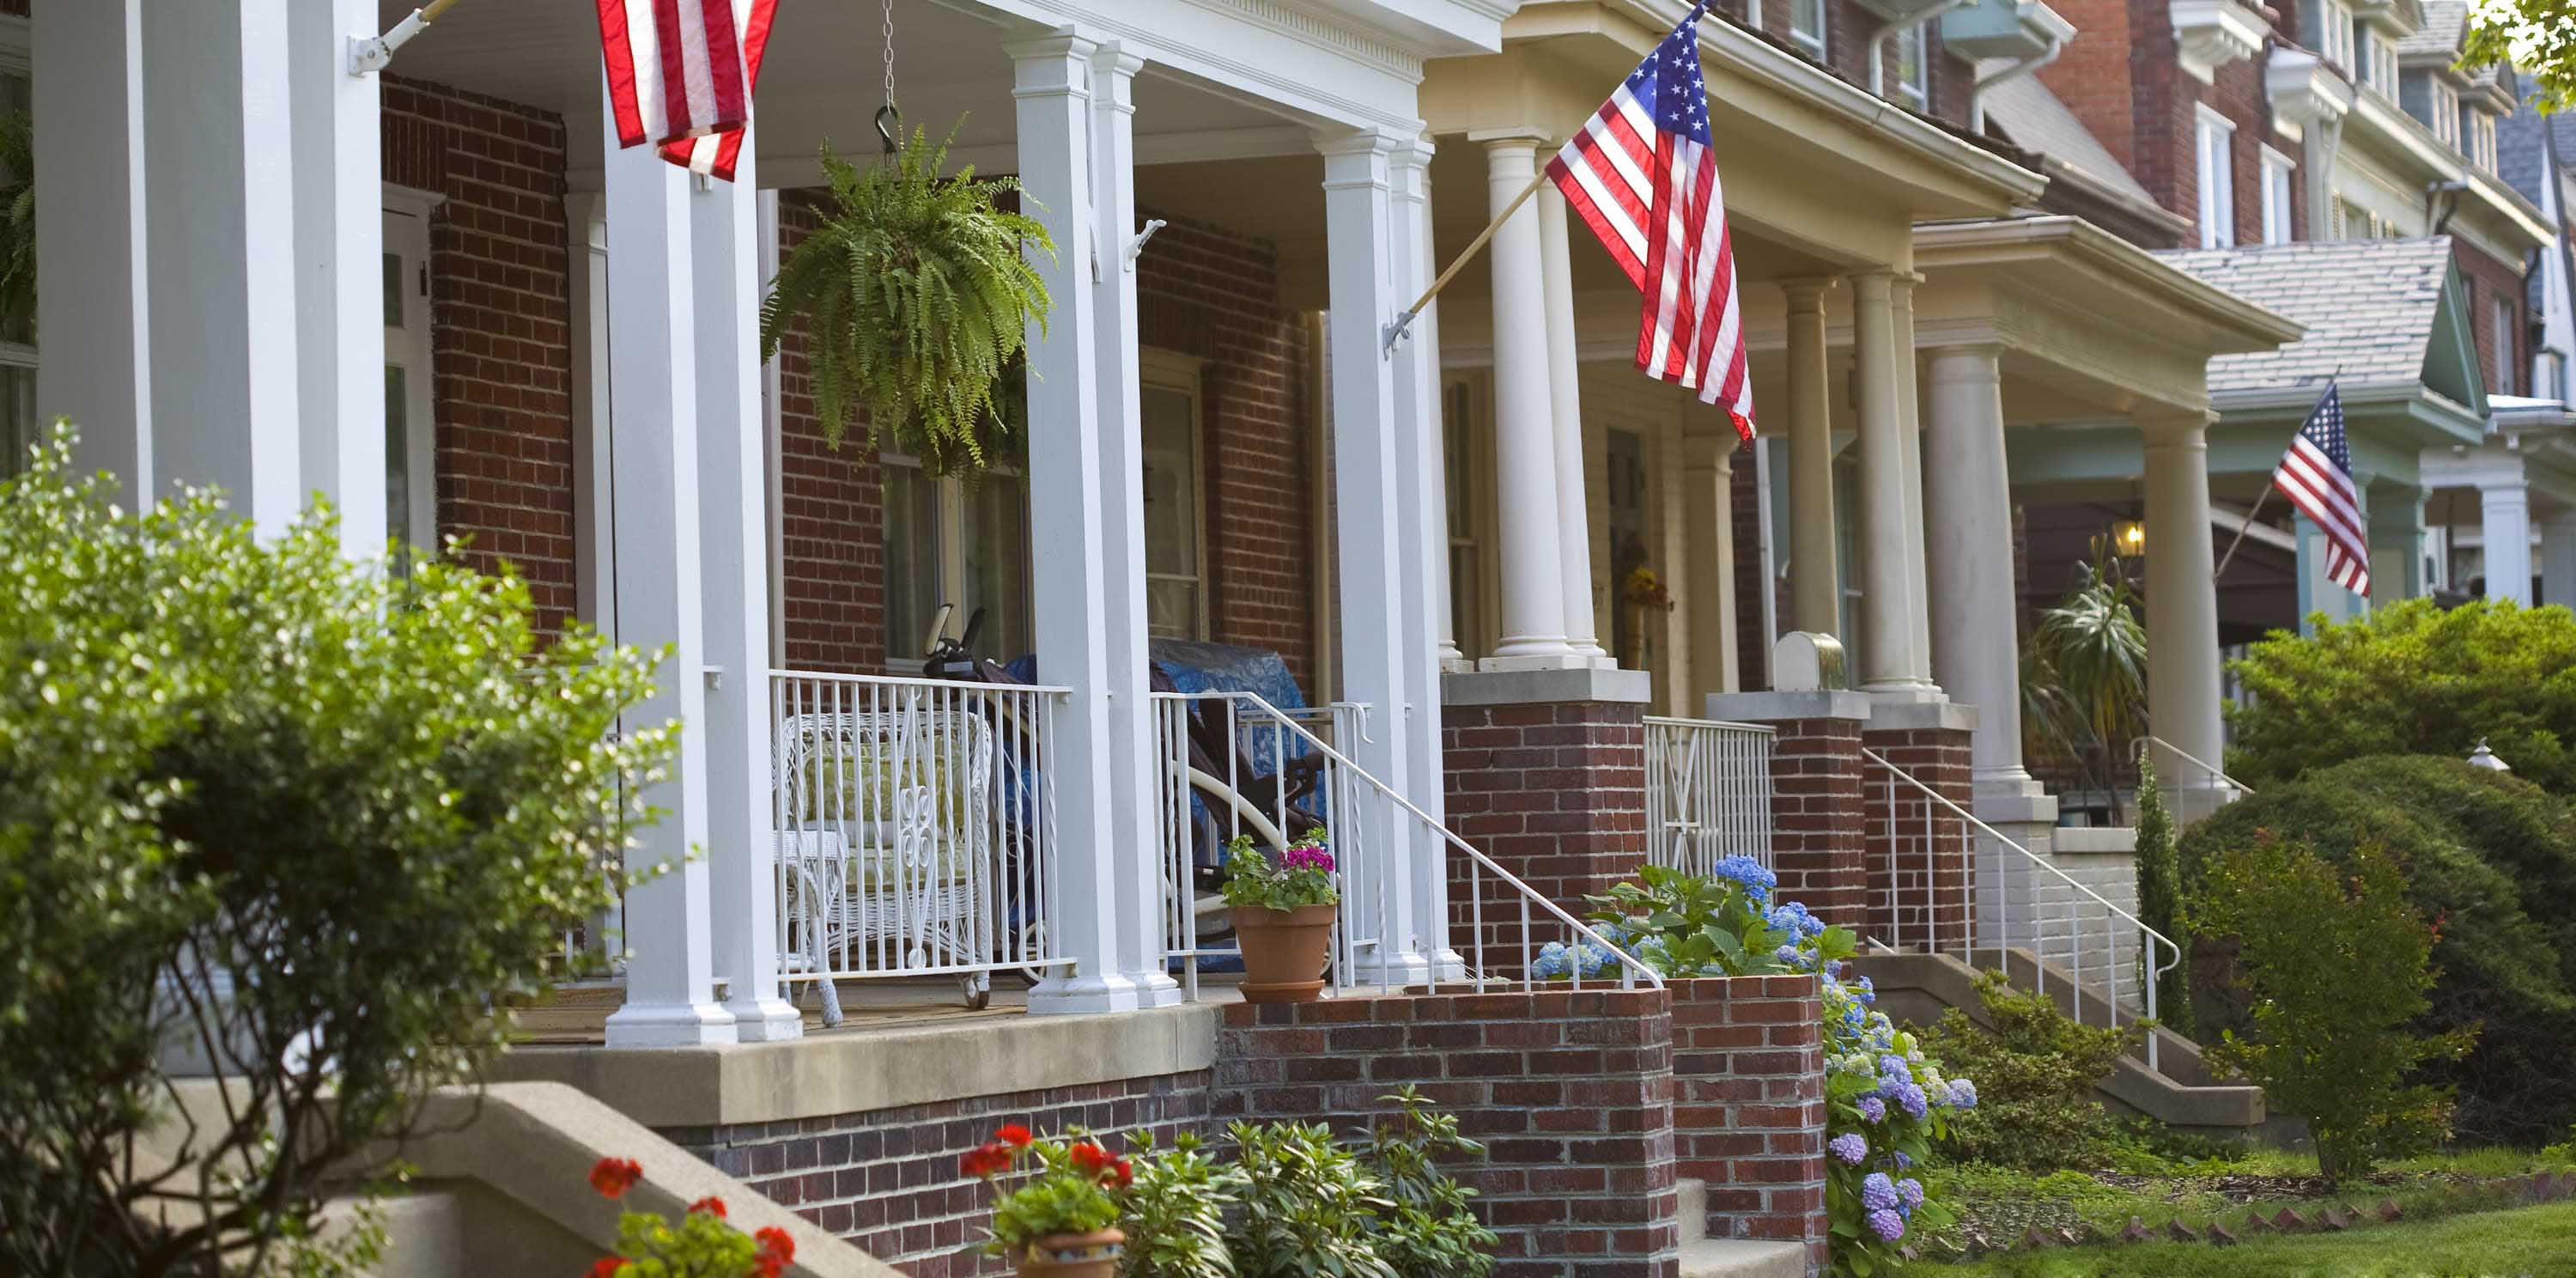 veteran owned homes with american flags waving